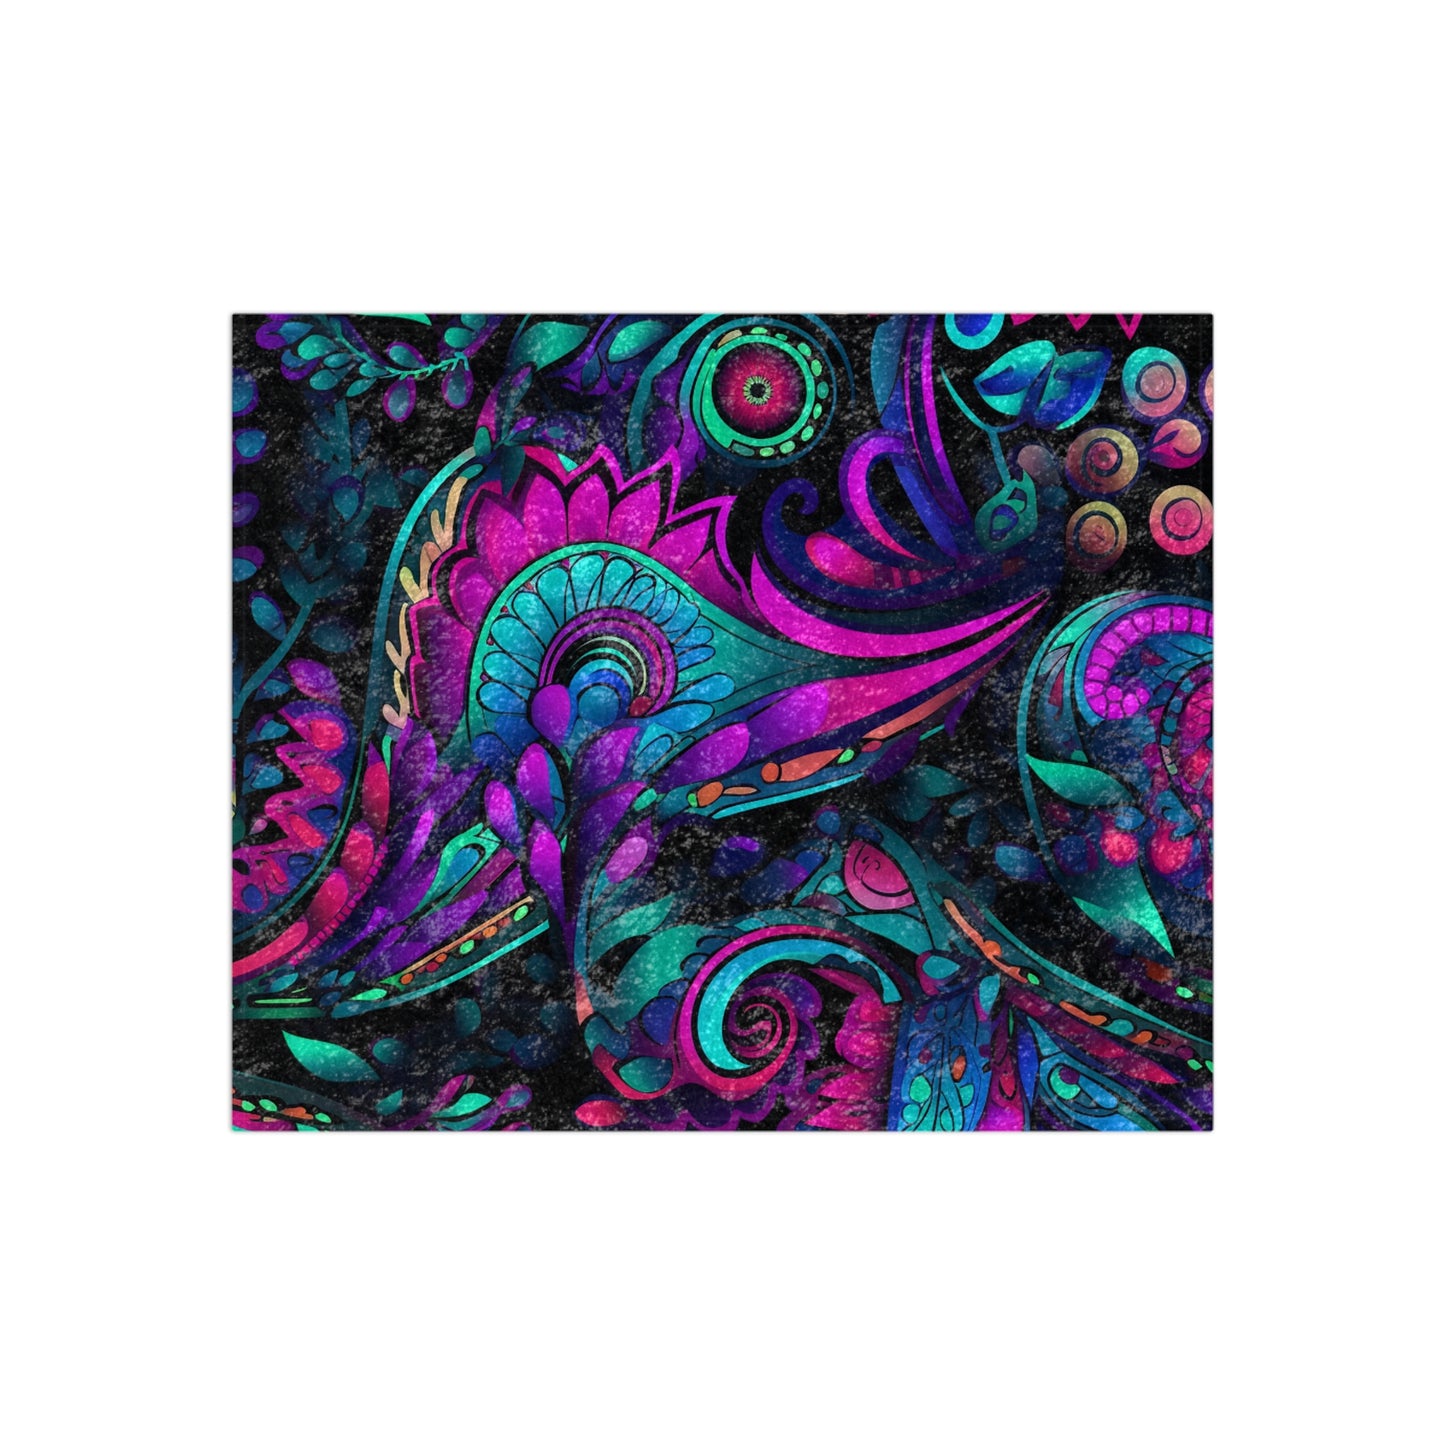 Neon Colorful Design, Neon Abstract, Neon Style, Crushed Velvet Blanket